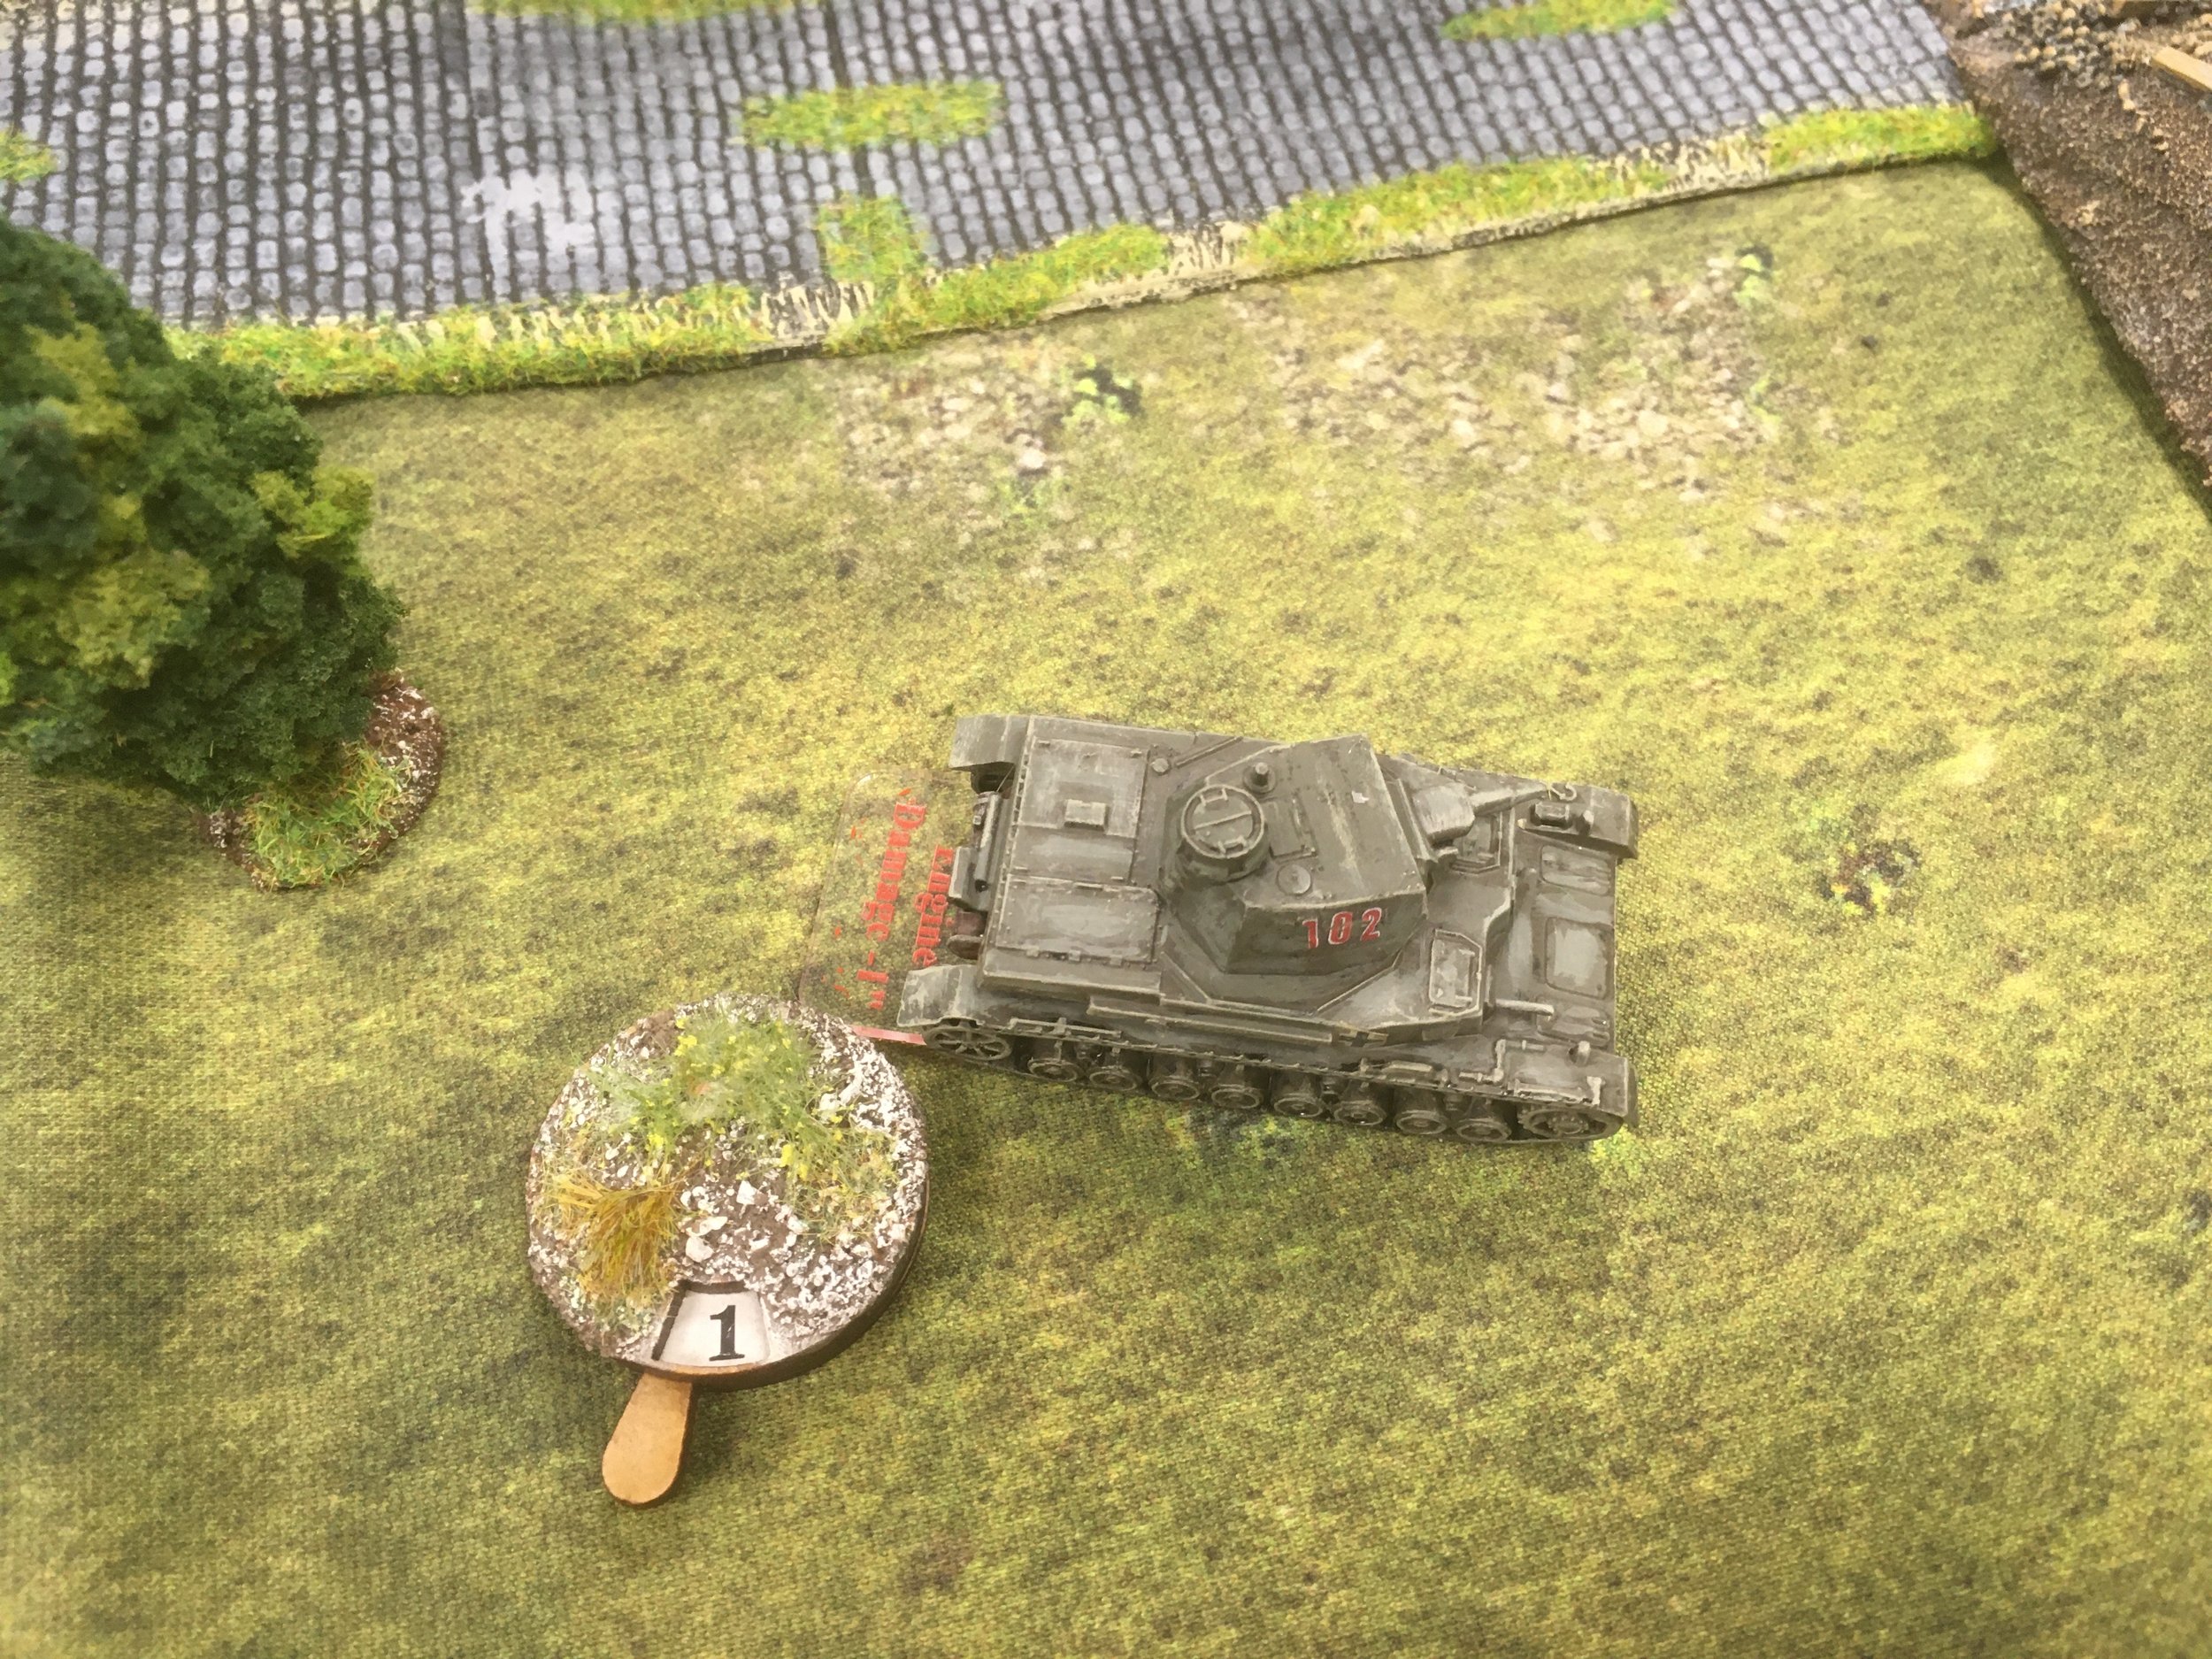  A lucky shot from one of the SA34's hits the Panzer IV and causes some engine damage...